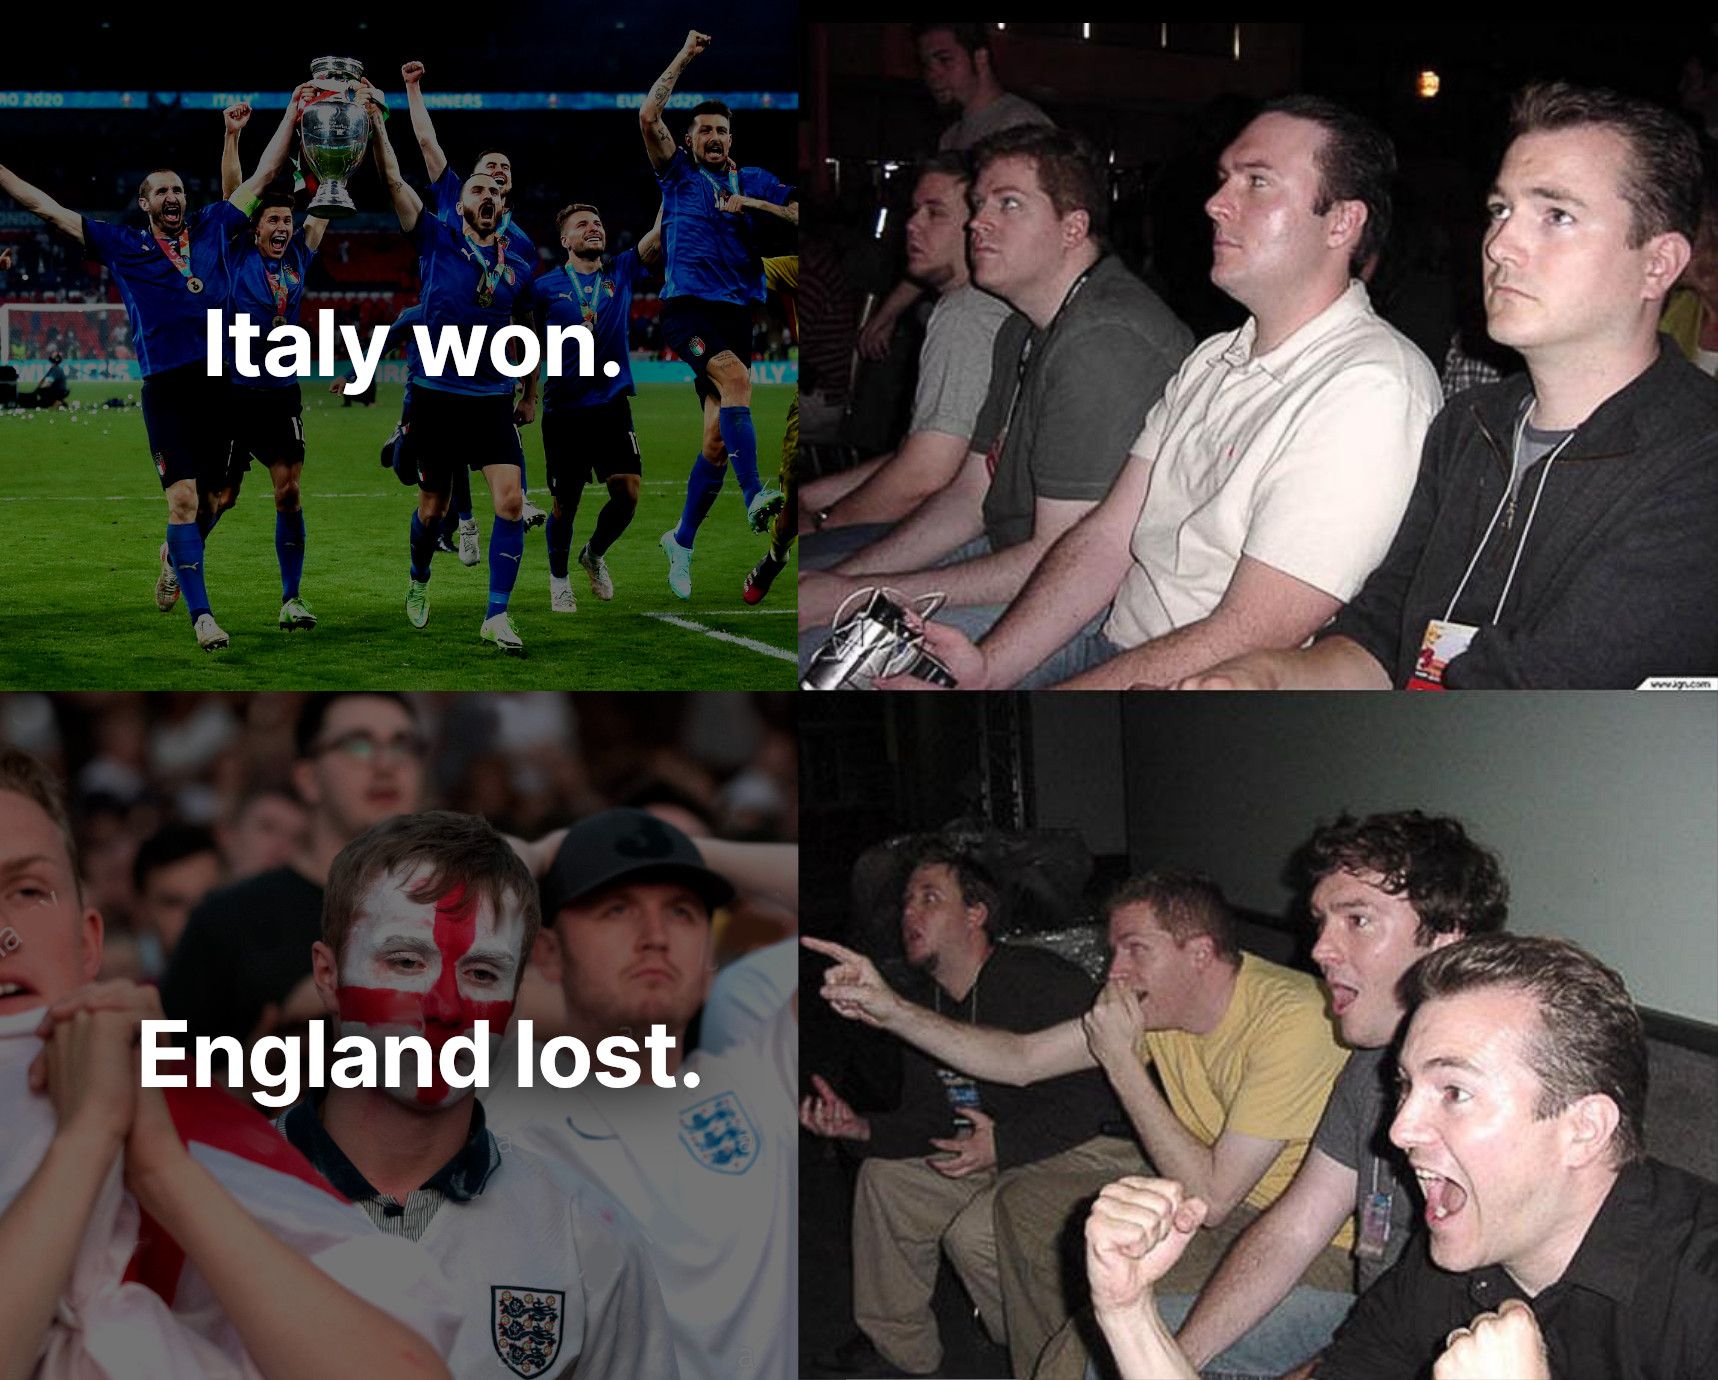 England fans were humbled